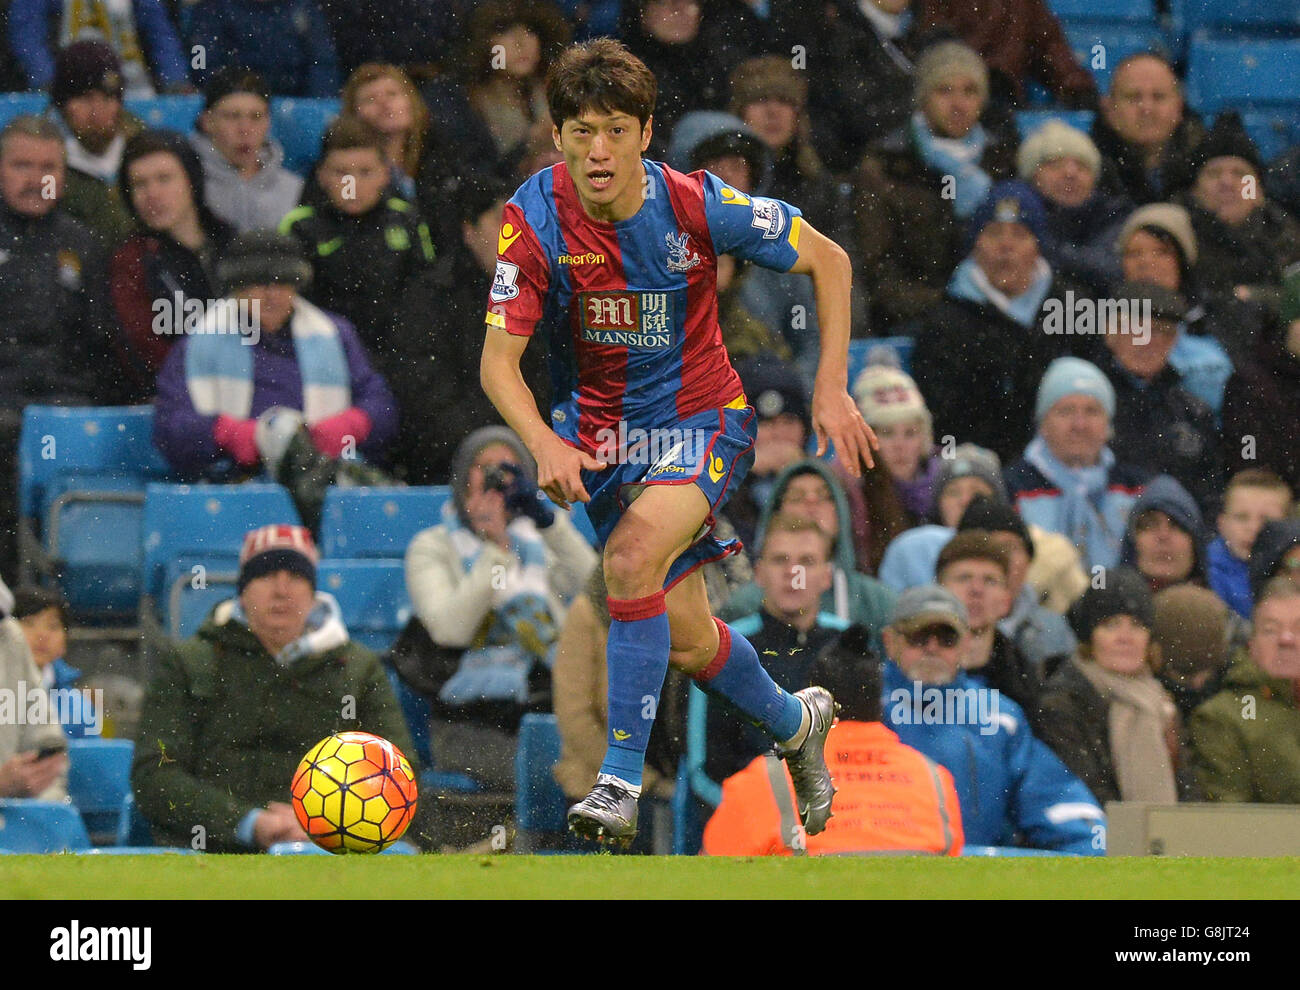 Crystal Palace's Lee Chung-yong during the Barclays Premier League match at the Etihad Stadium, Manchester. PRESS ASSOCIATION Photo. Picture date: Saturday January 16, 2016. See PA story SOCCER Man City. Photo credit should read: Martin Rickett/PA Wire. Stock Photo